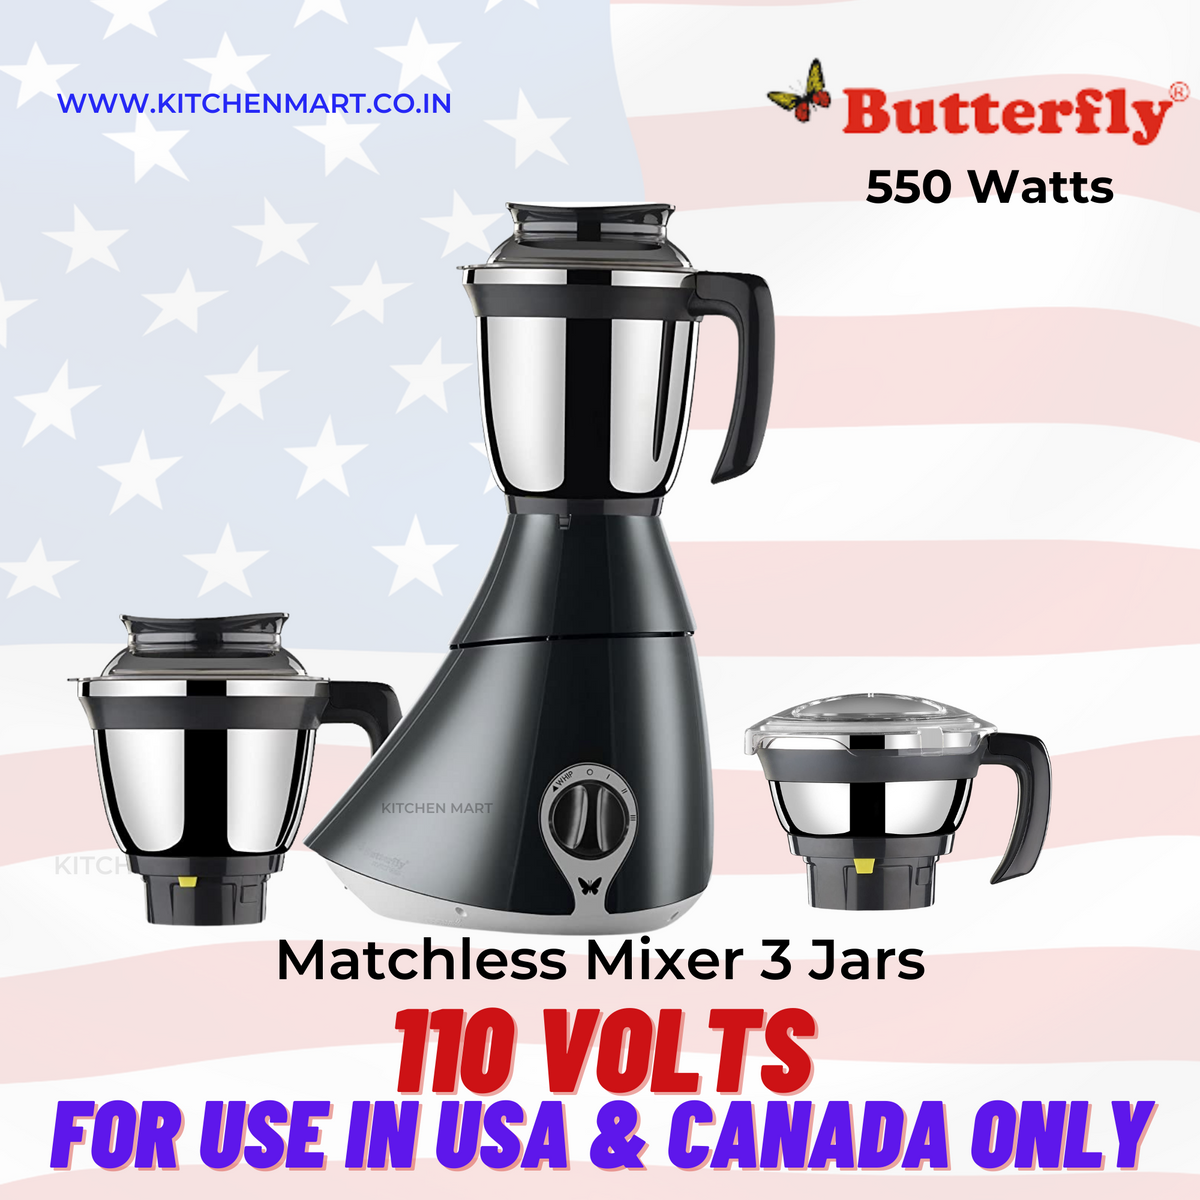 Butterfly Matchless Mixer Grinder 550 watts, 110 votls for use in USA &amp; Canada only